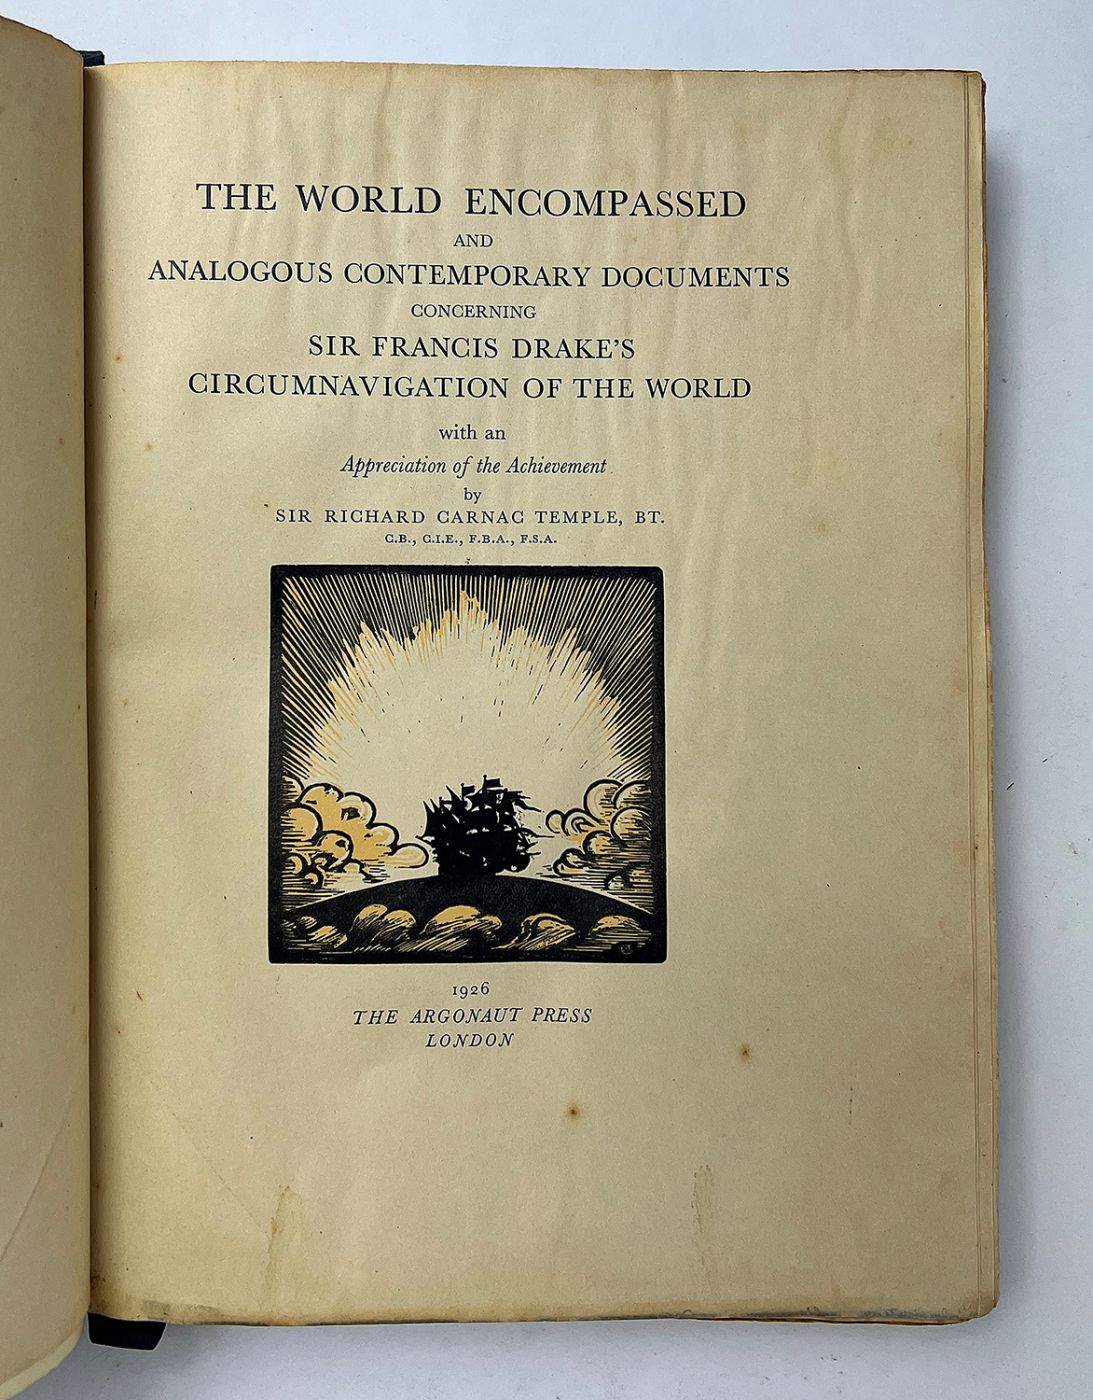 THE WORLD ENCOMPASSED AND ANALOGOUS CONTEMPORARY DOCUMENTS CONCERNING SIR FRANCIS DRAKE'S CIRCUMNAVIGATION OF THE WORLD: -  image 2